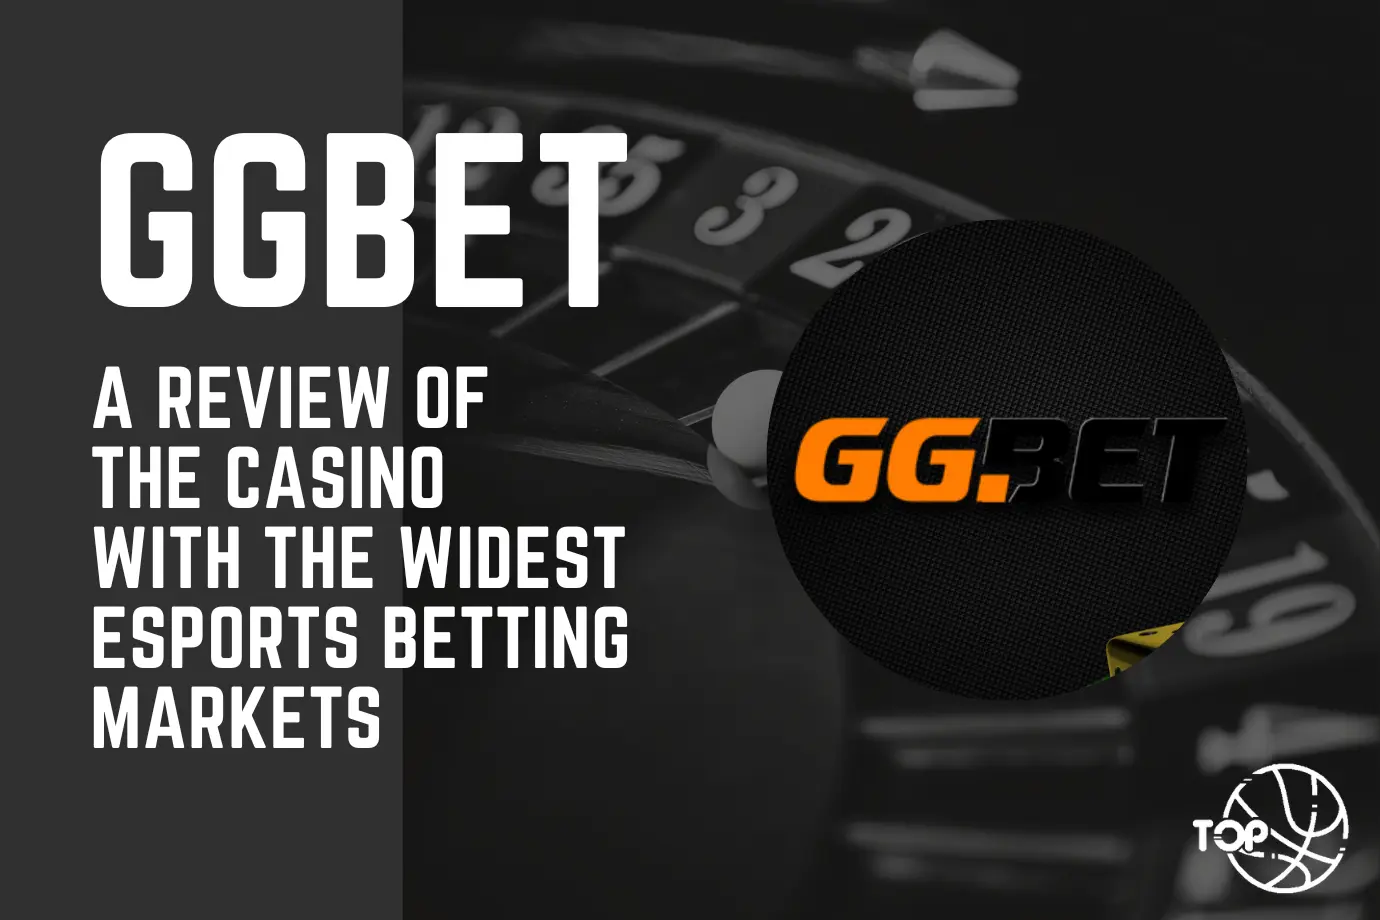 GGBET: A Review of the Casino with the Widest ESports Betting Markets